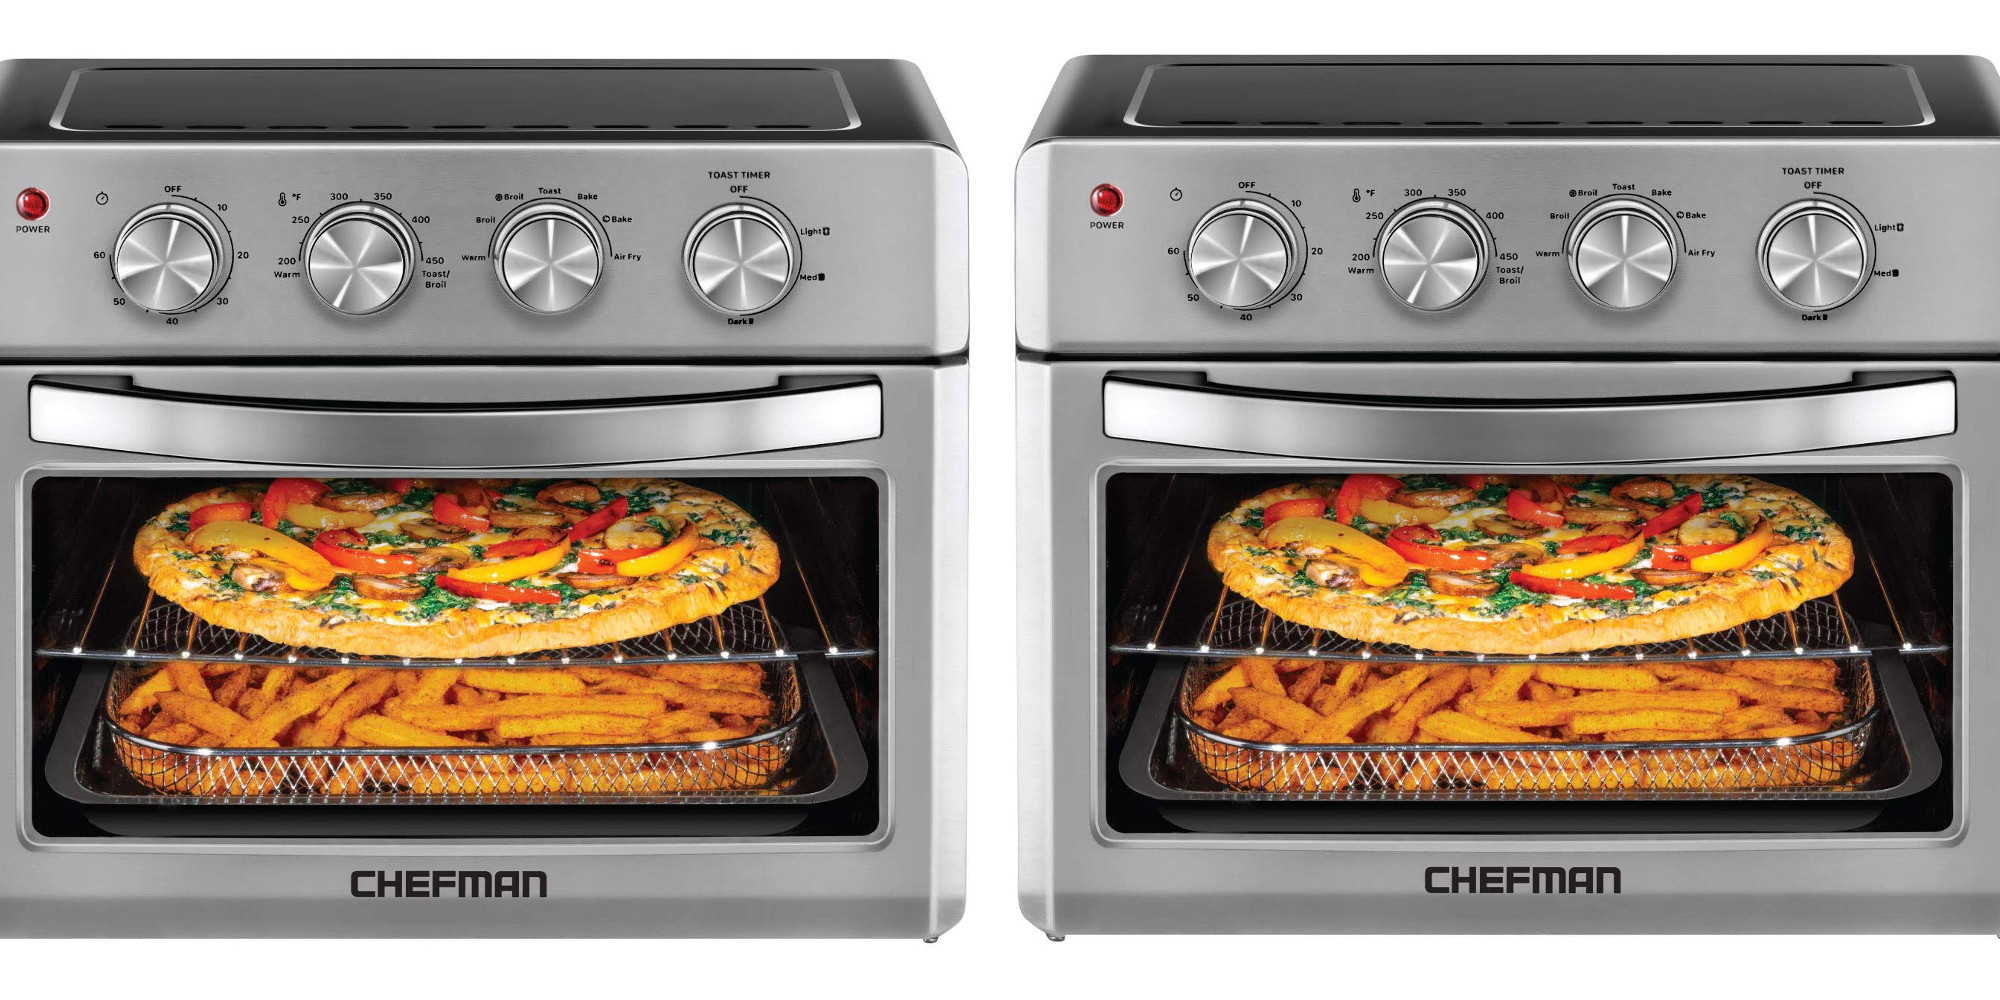 https://9to5toys.com/wp-content/uploads/sites/5/2019/12/Chefman-25L-Toaster-Oven-Air-Fryer.jpg